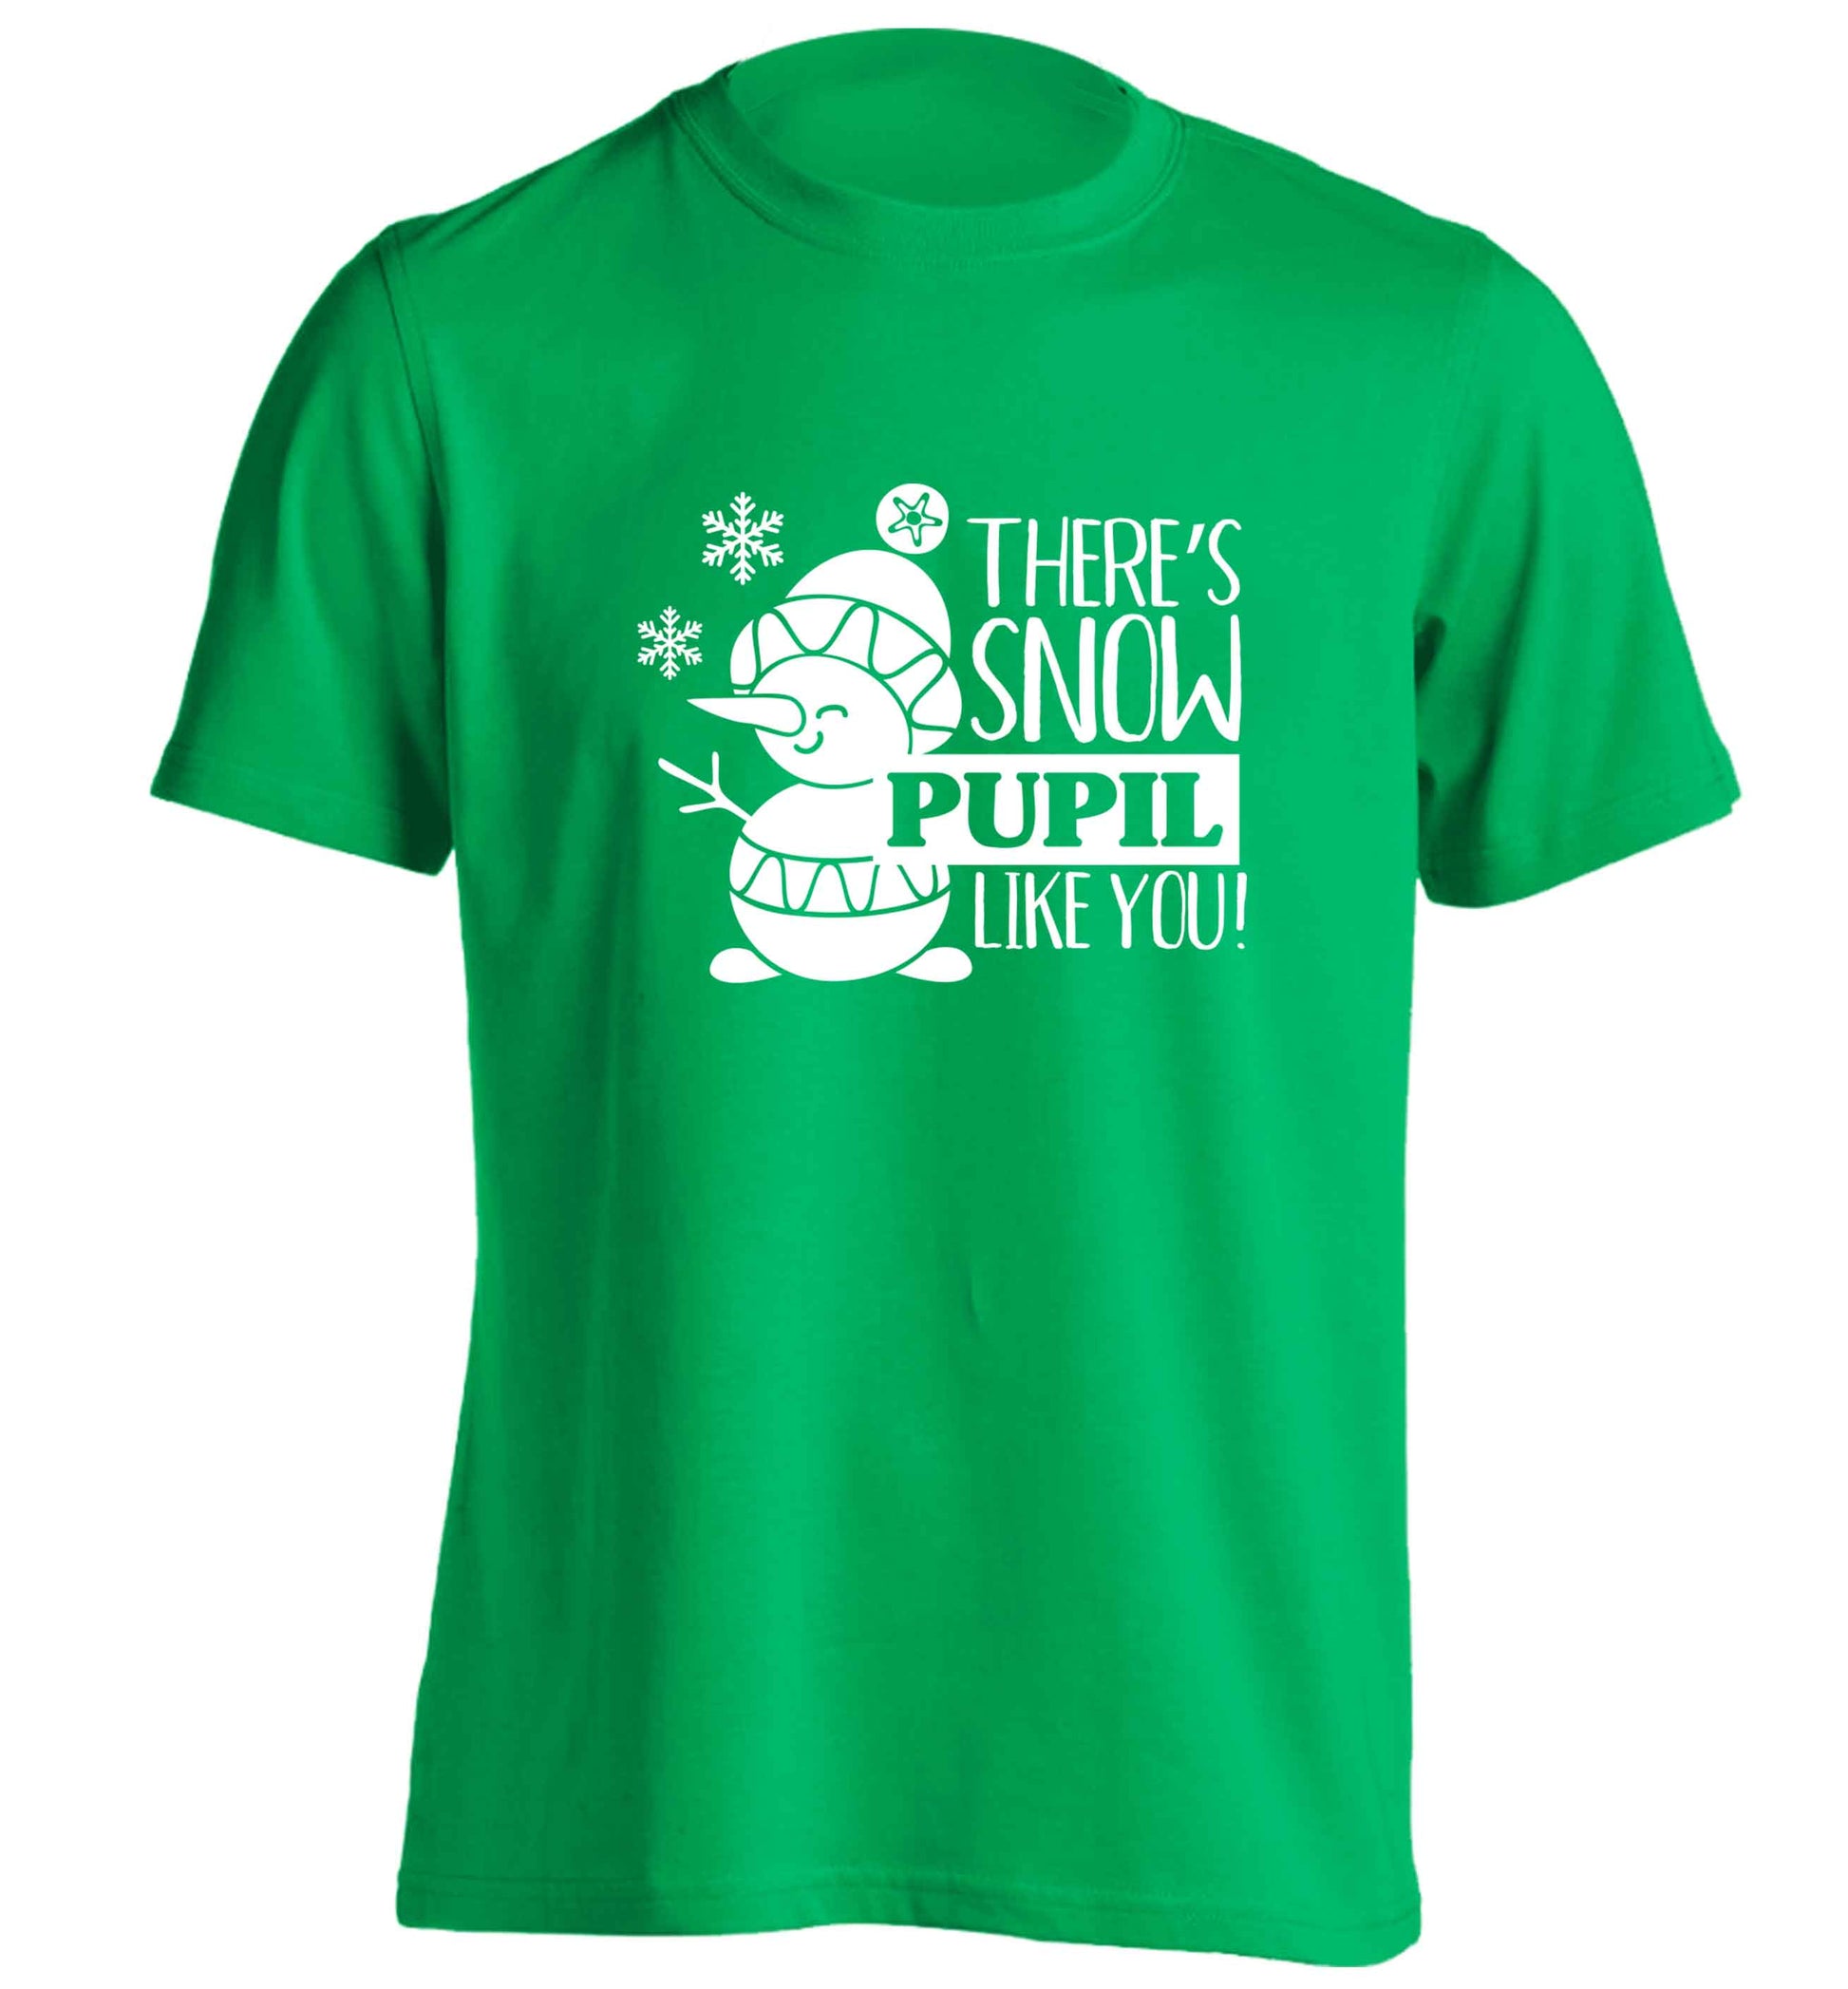 There's snow pupil like you adults unisex green Tshirt 2XL